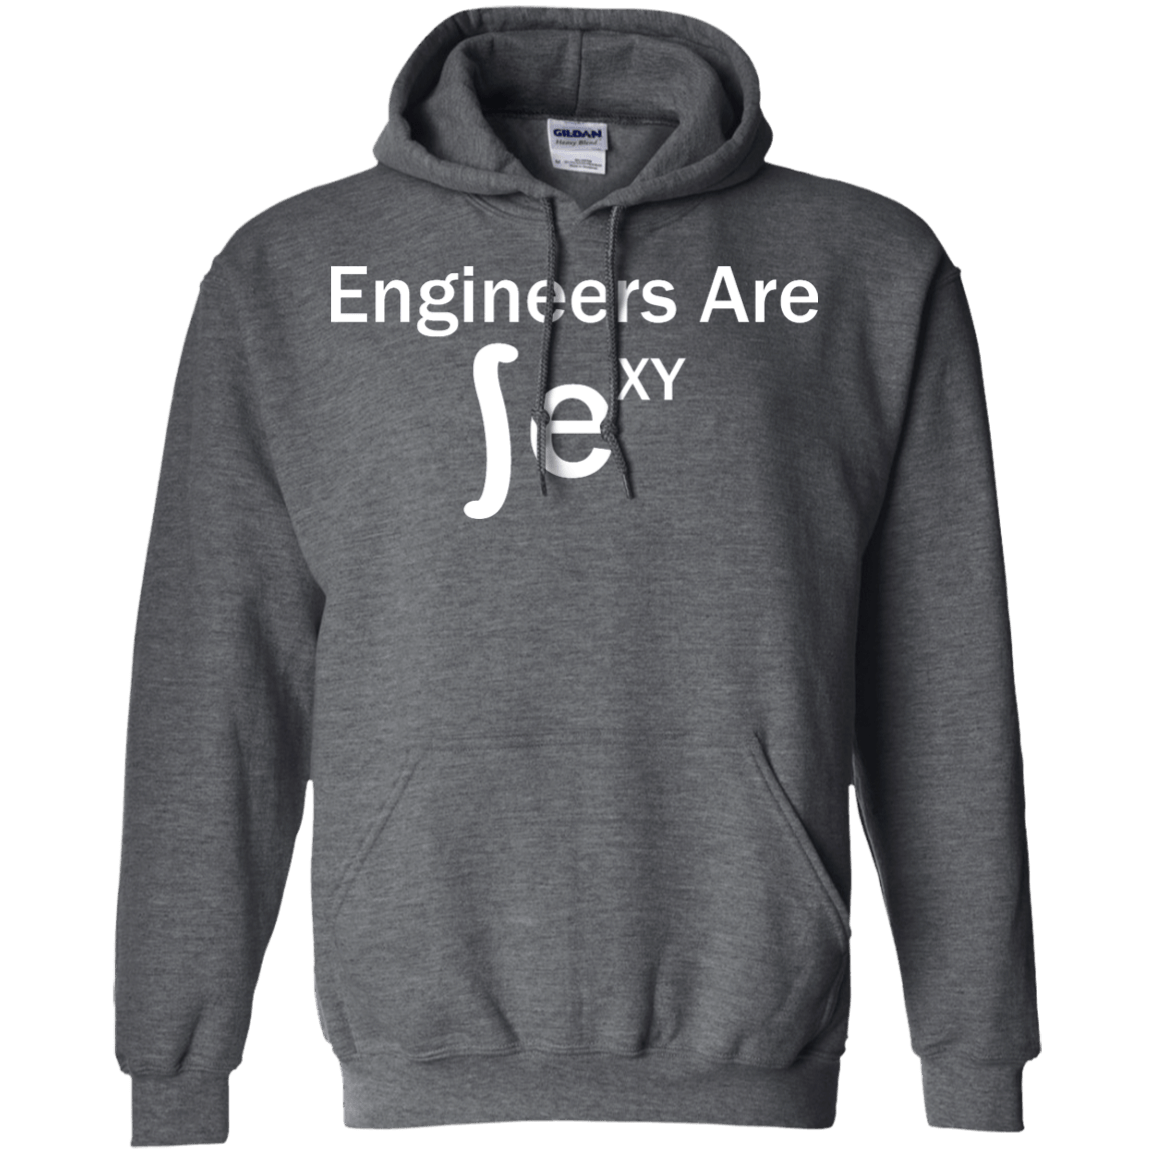 Engineers Are Sexy - Engineering Outfitters